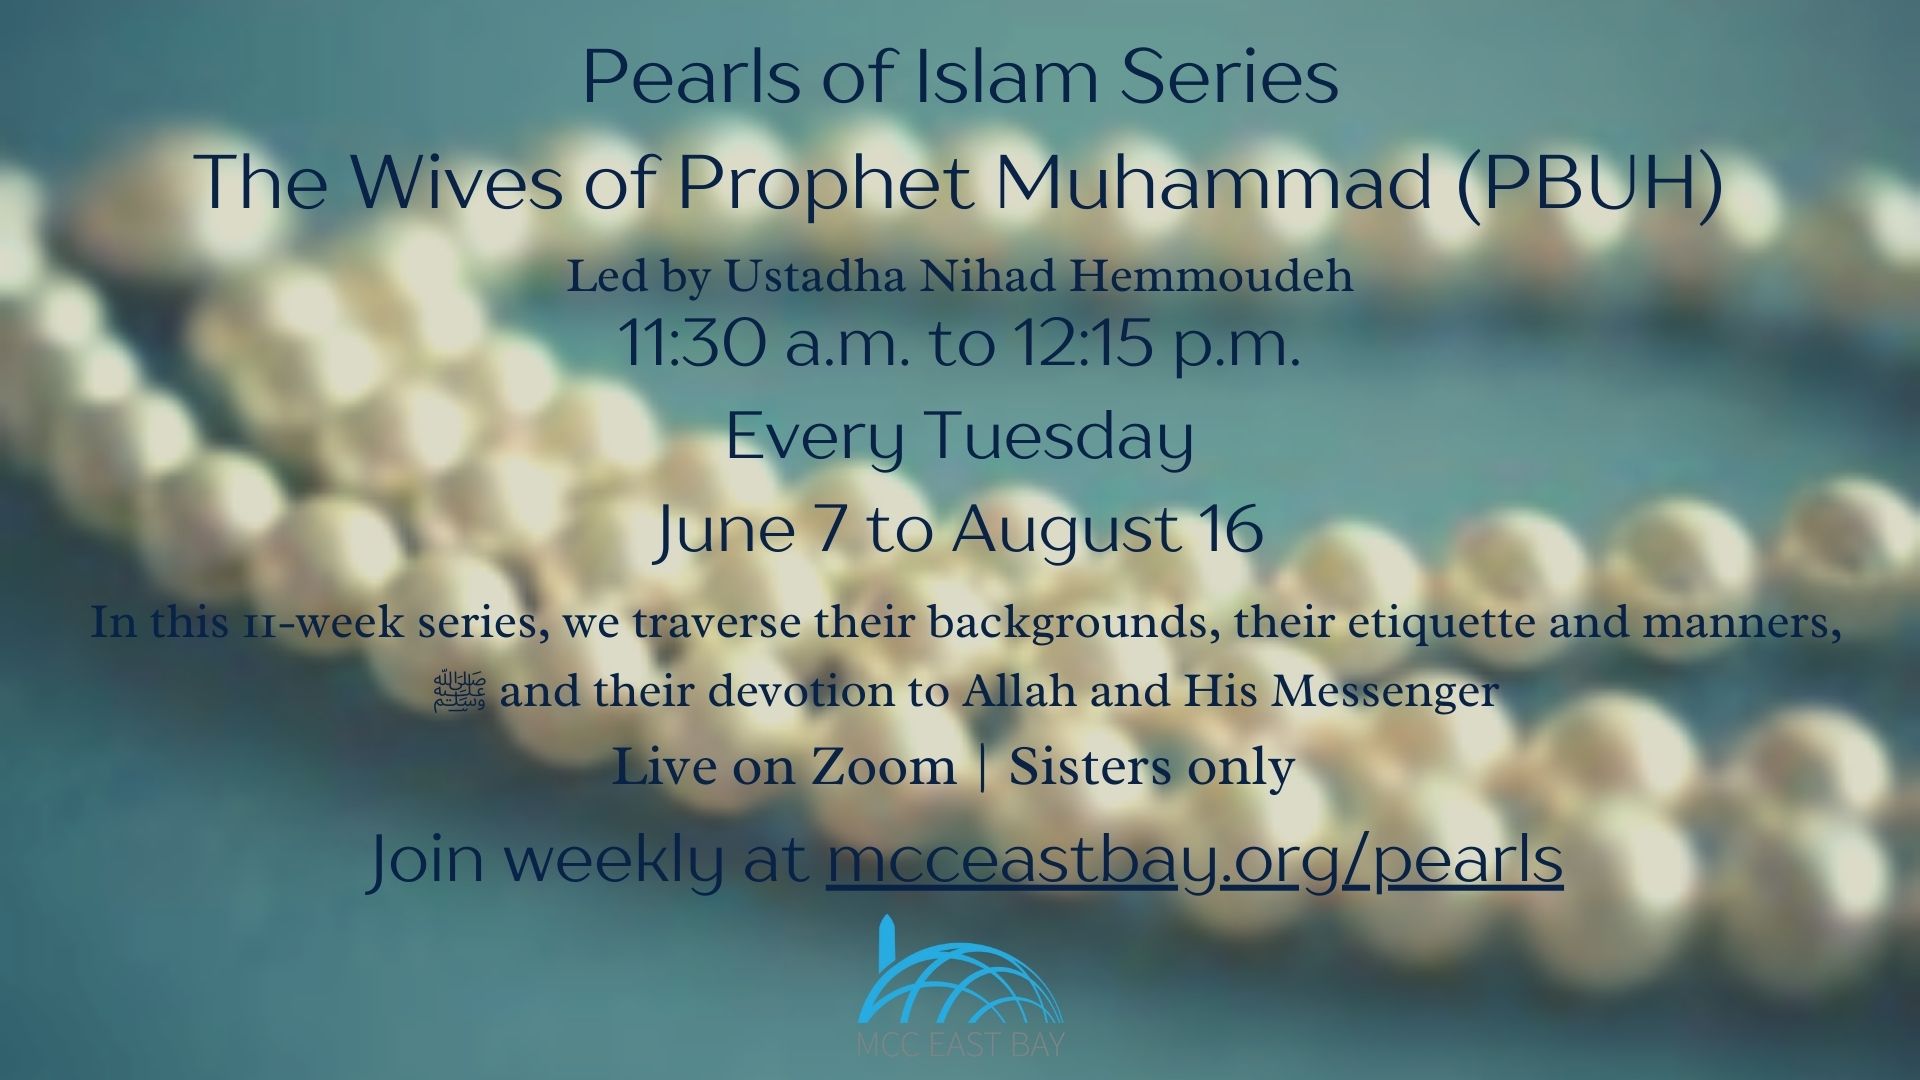 Pearls of Islam: The Wives of Prophet Muhammad (PBUH)